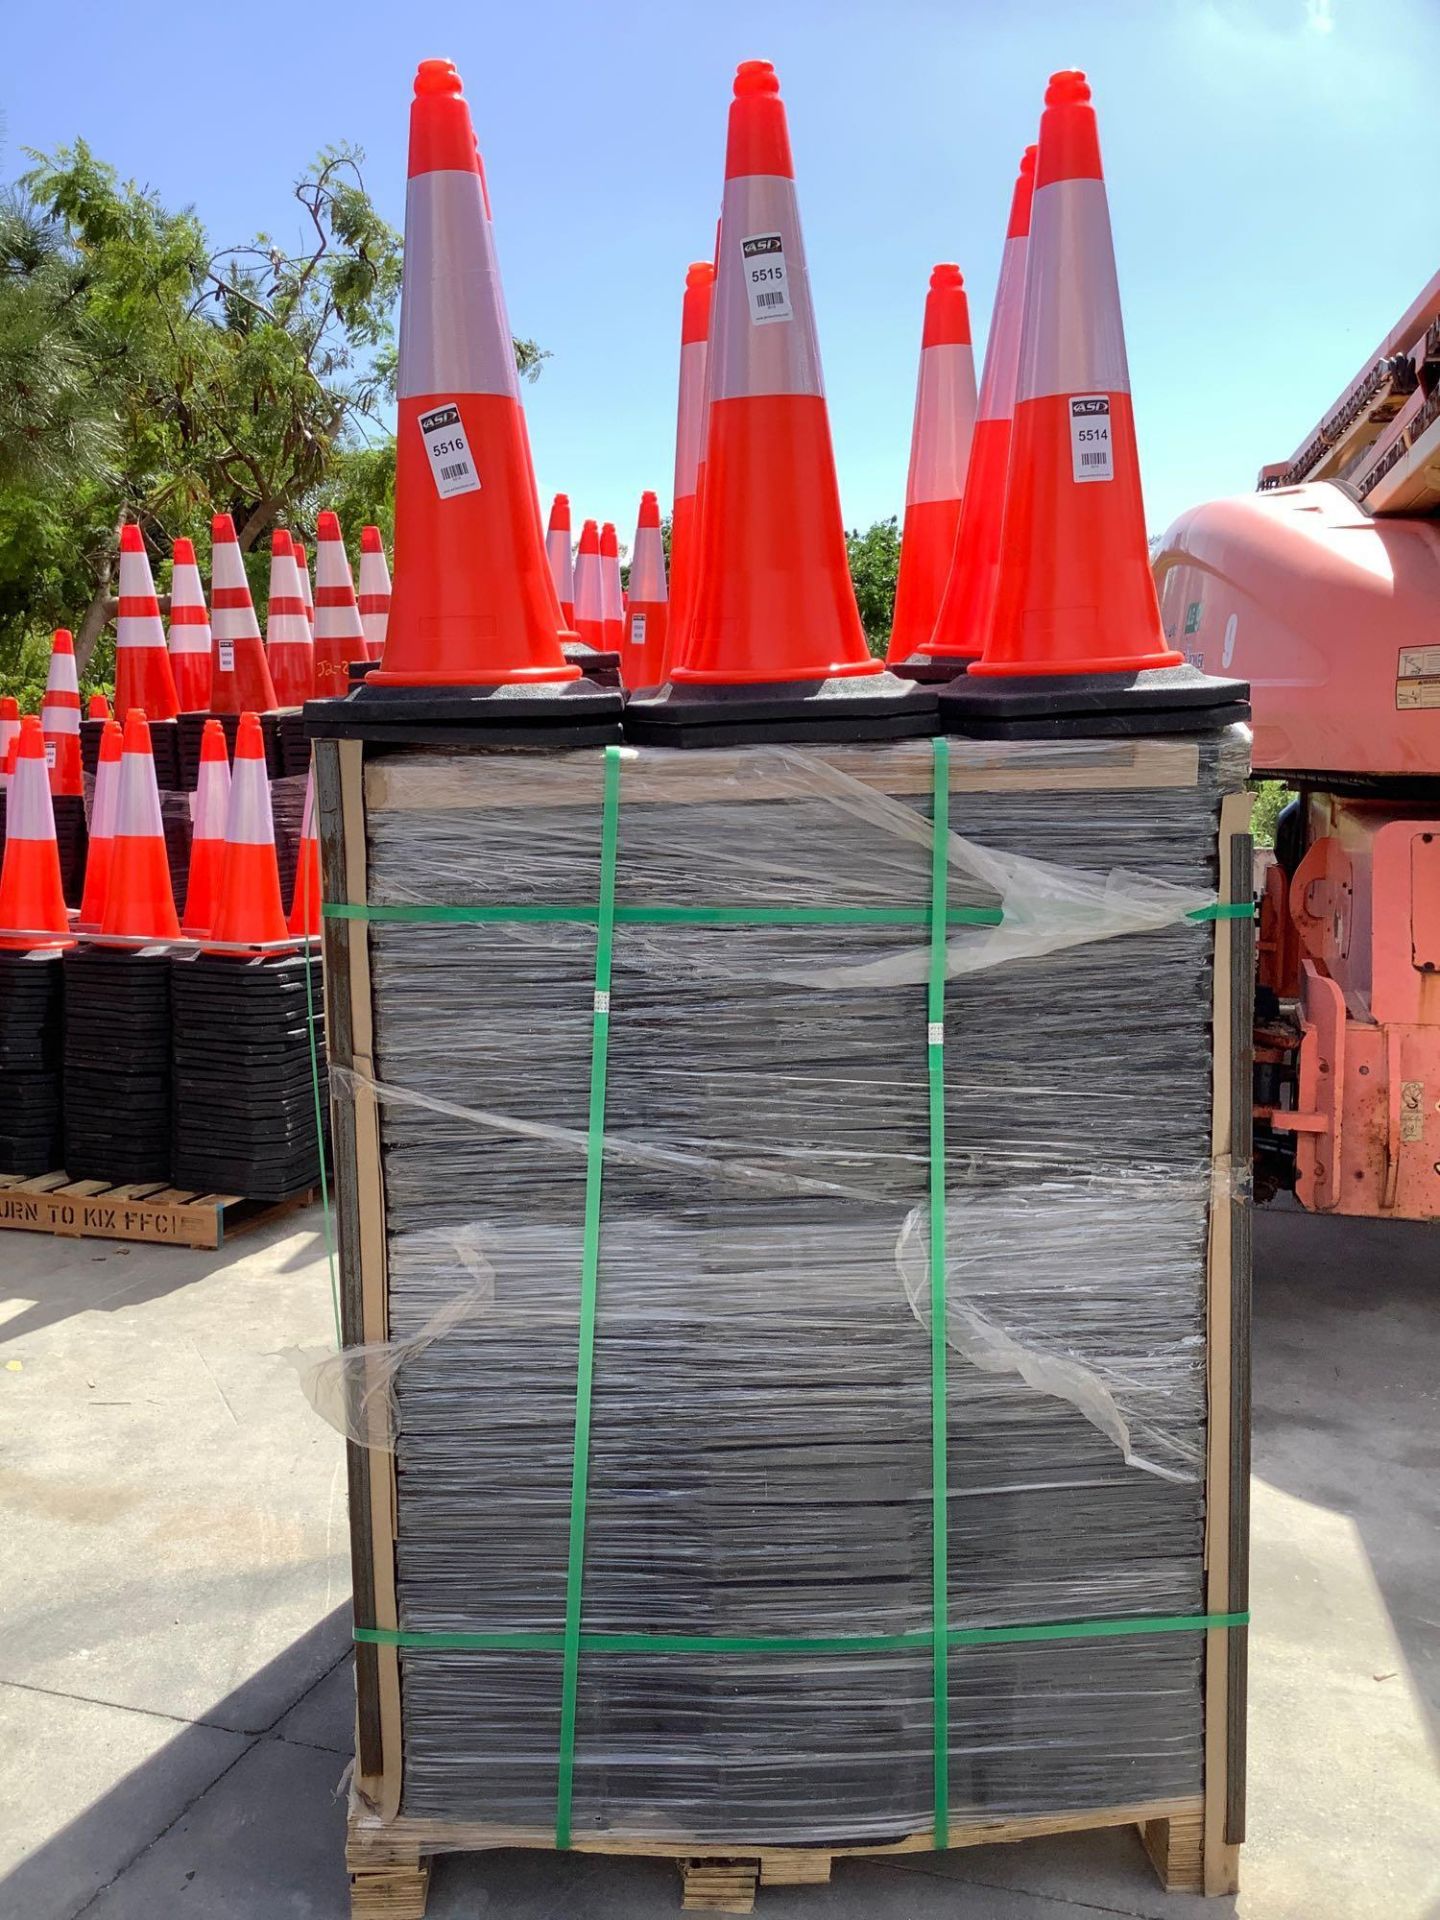 100 UNUSED PVC SAFETY TRAFFIC HIGHWAY CONES APPROX 28IN